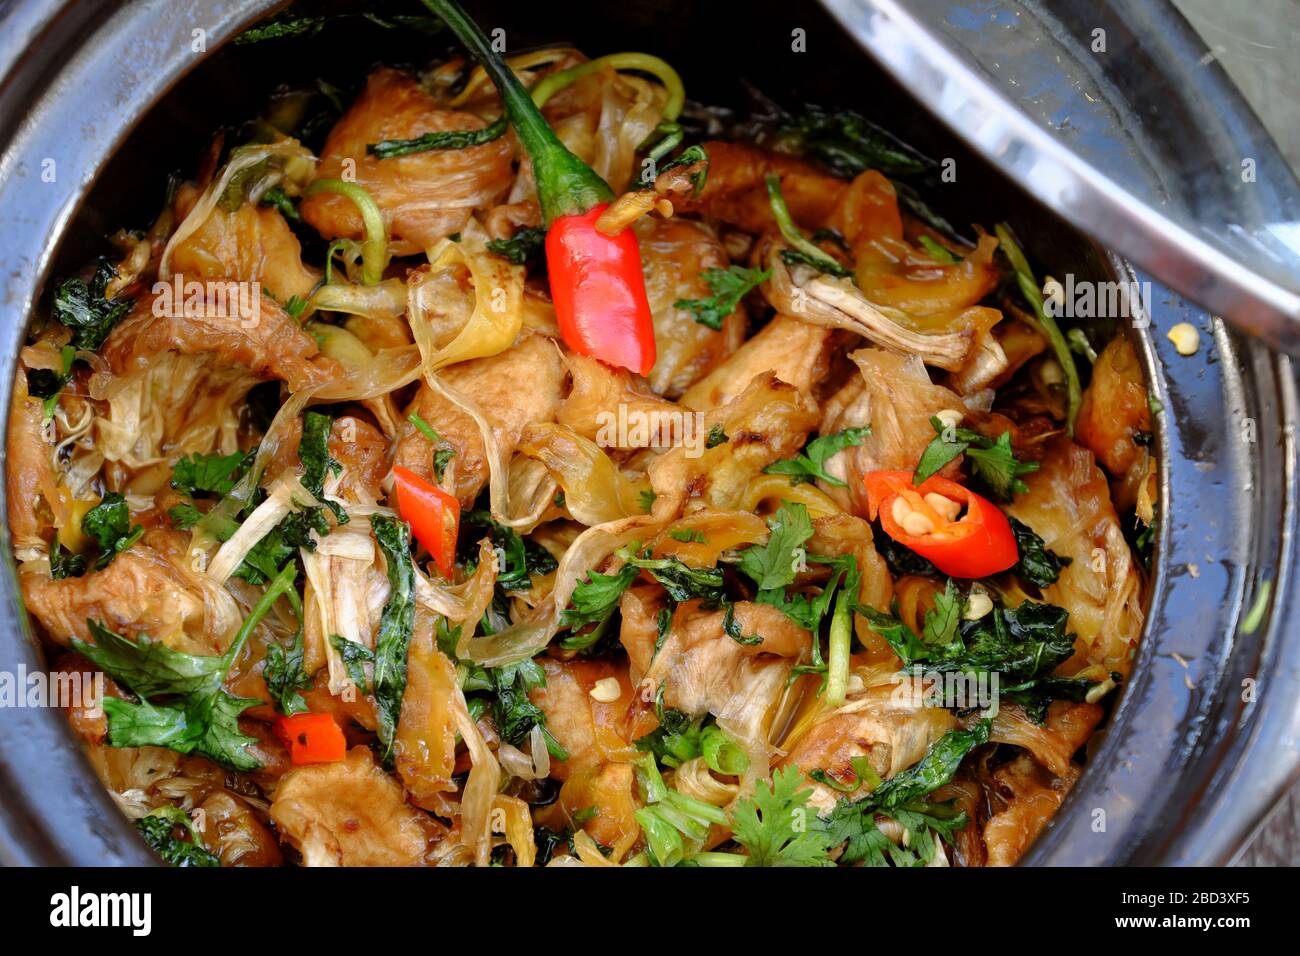 homemade Vietnamese vegan food for daily meal,edible fibre of breadfruit cook dried with sauce, laksa leaves, delicious vegetarian dish from jackfruit Stock Photo